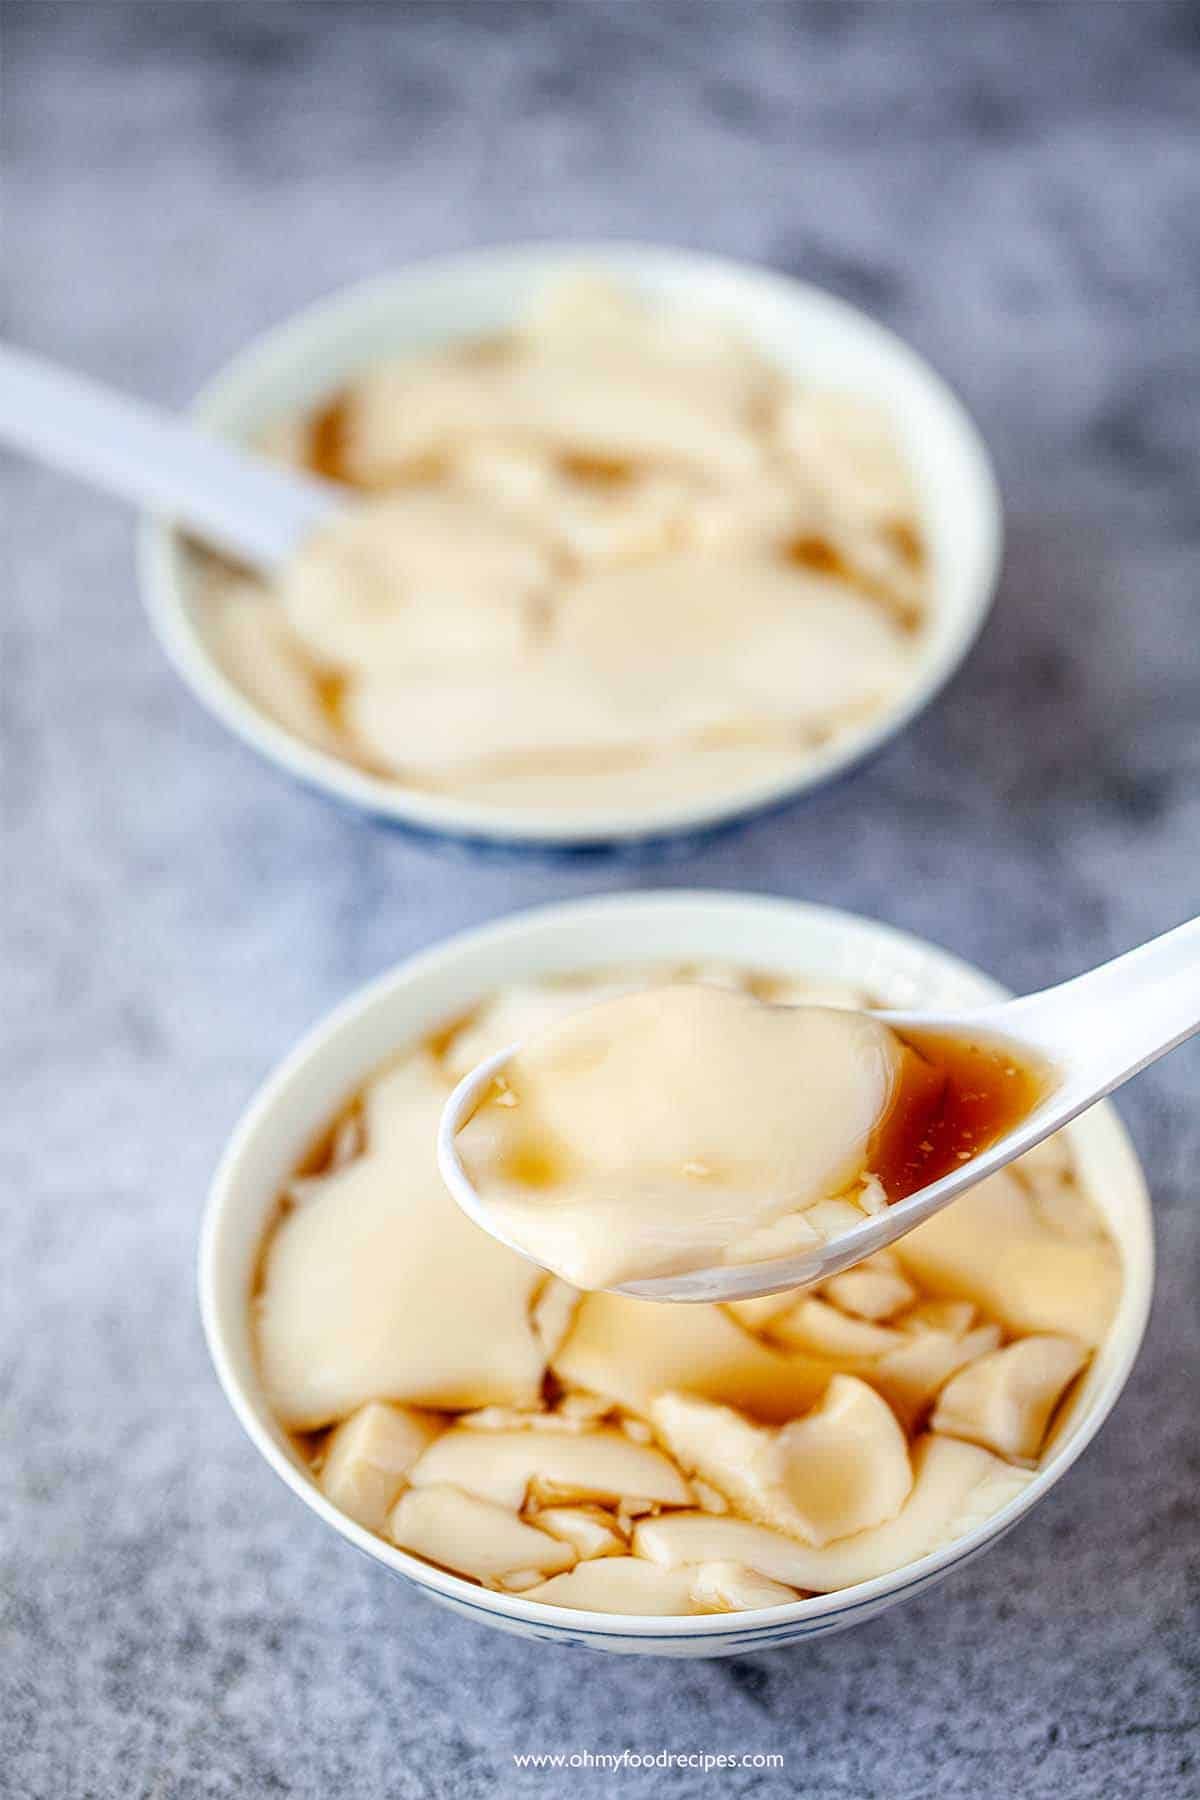 Delicious soy bean curd dessert in white bowls.